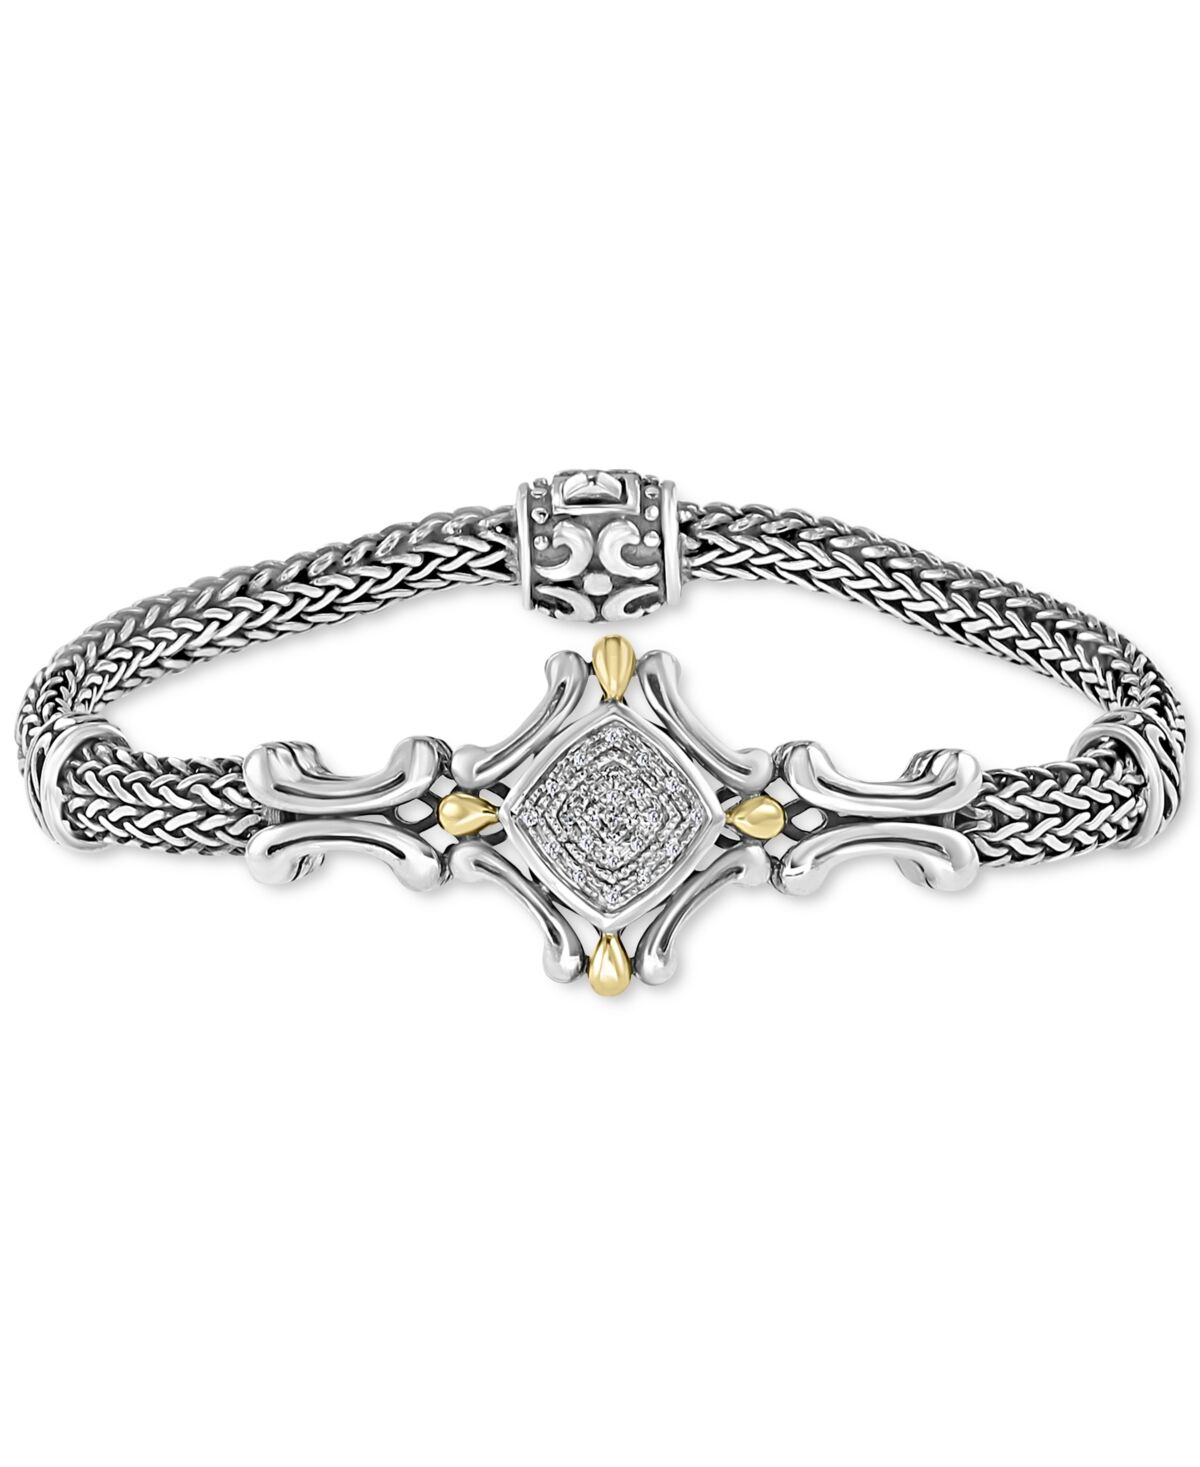 Effy Collection Effy Diamond Cluster Antique-Look Bracelet (1/10 ct. t.w.) in Sterling Silver & 18k Gold - Sterling Silver  k Gold